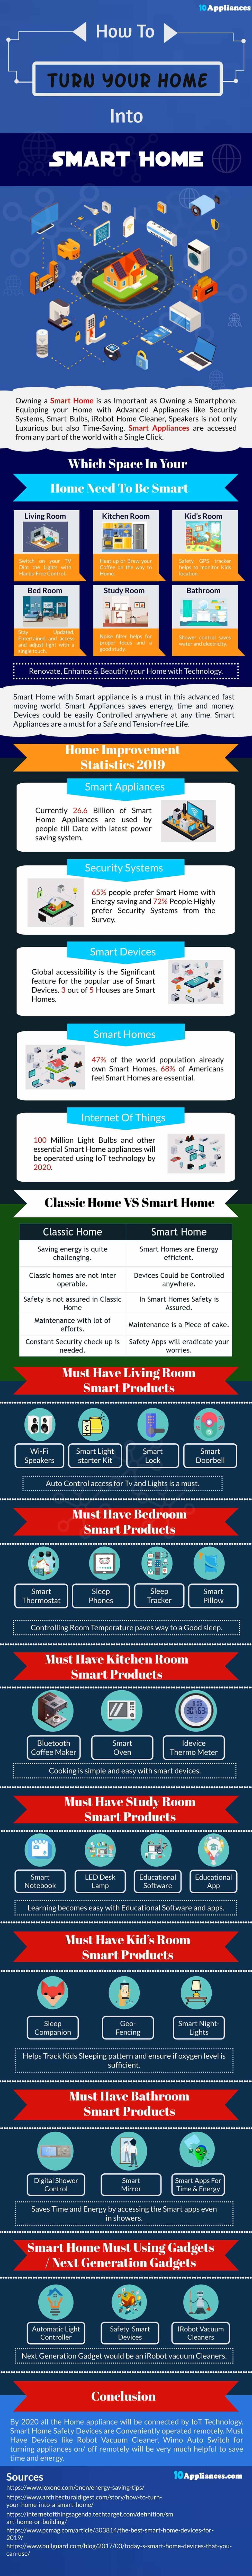 How To Turn Your Home Into Smart Home In 2019